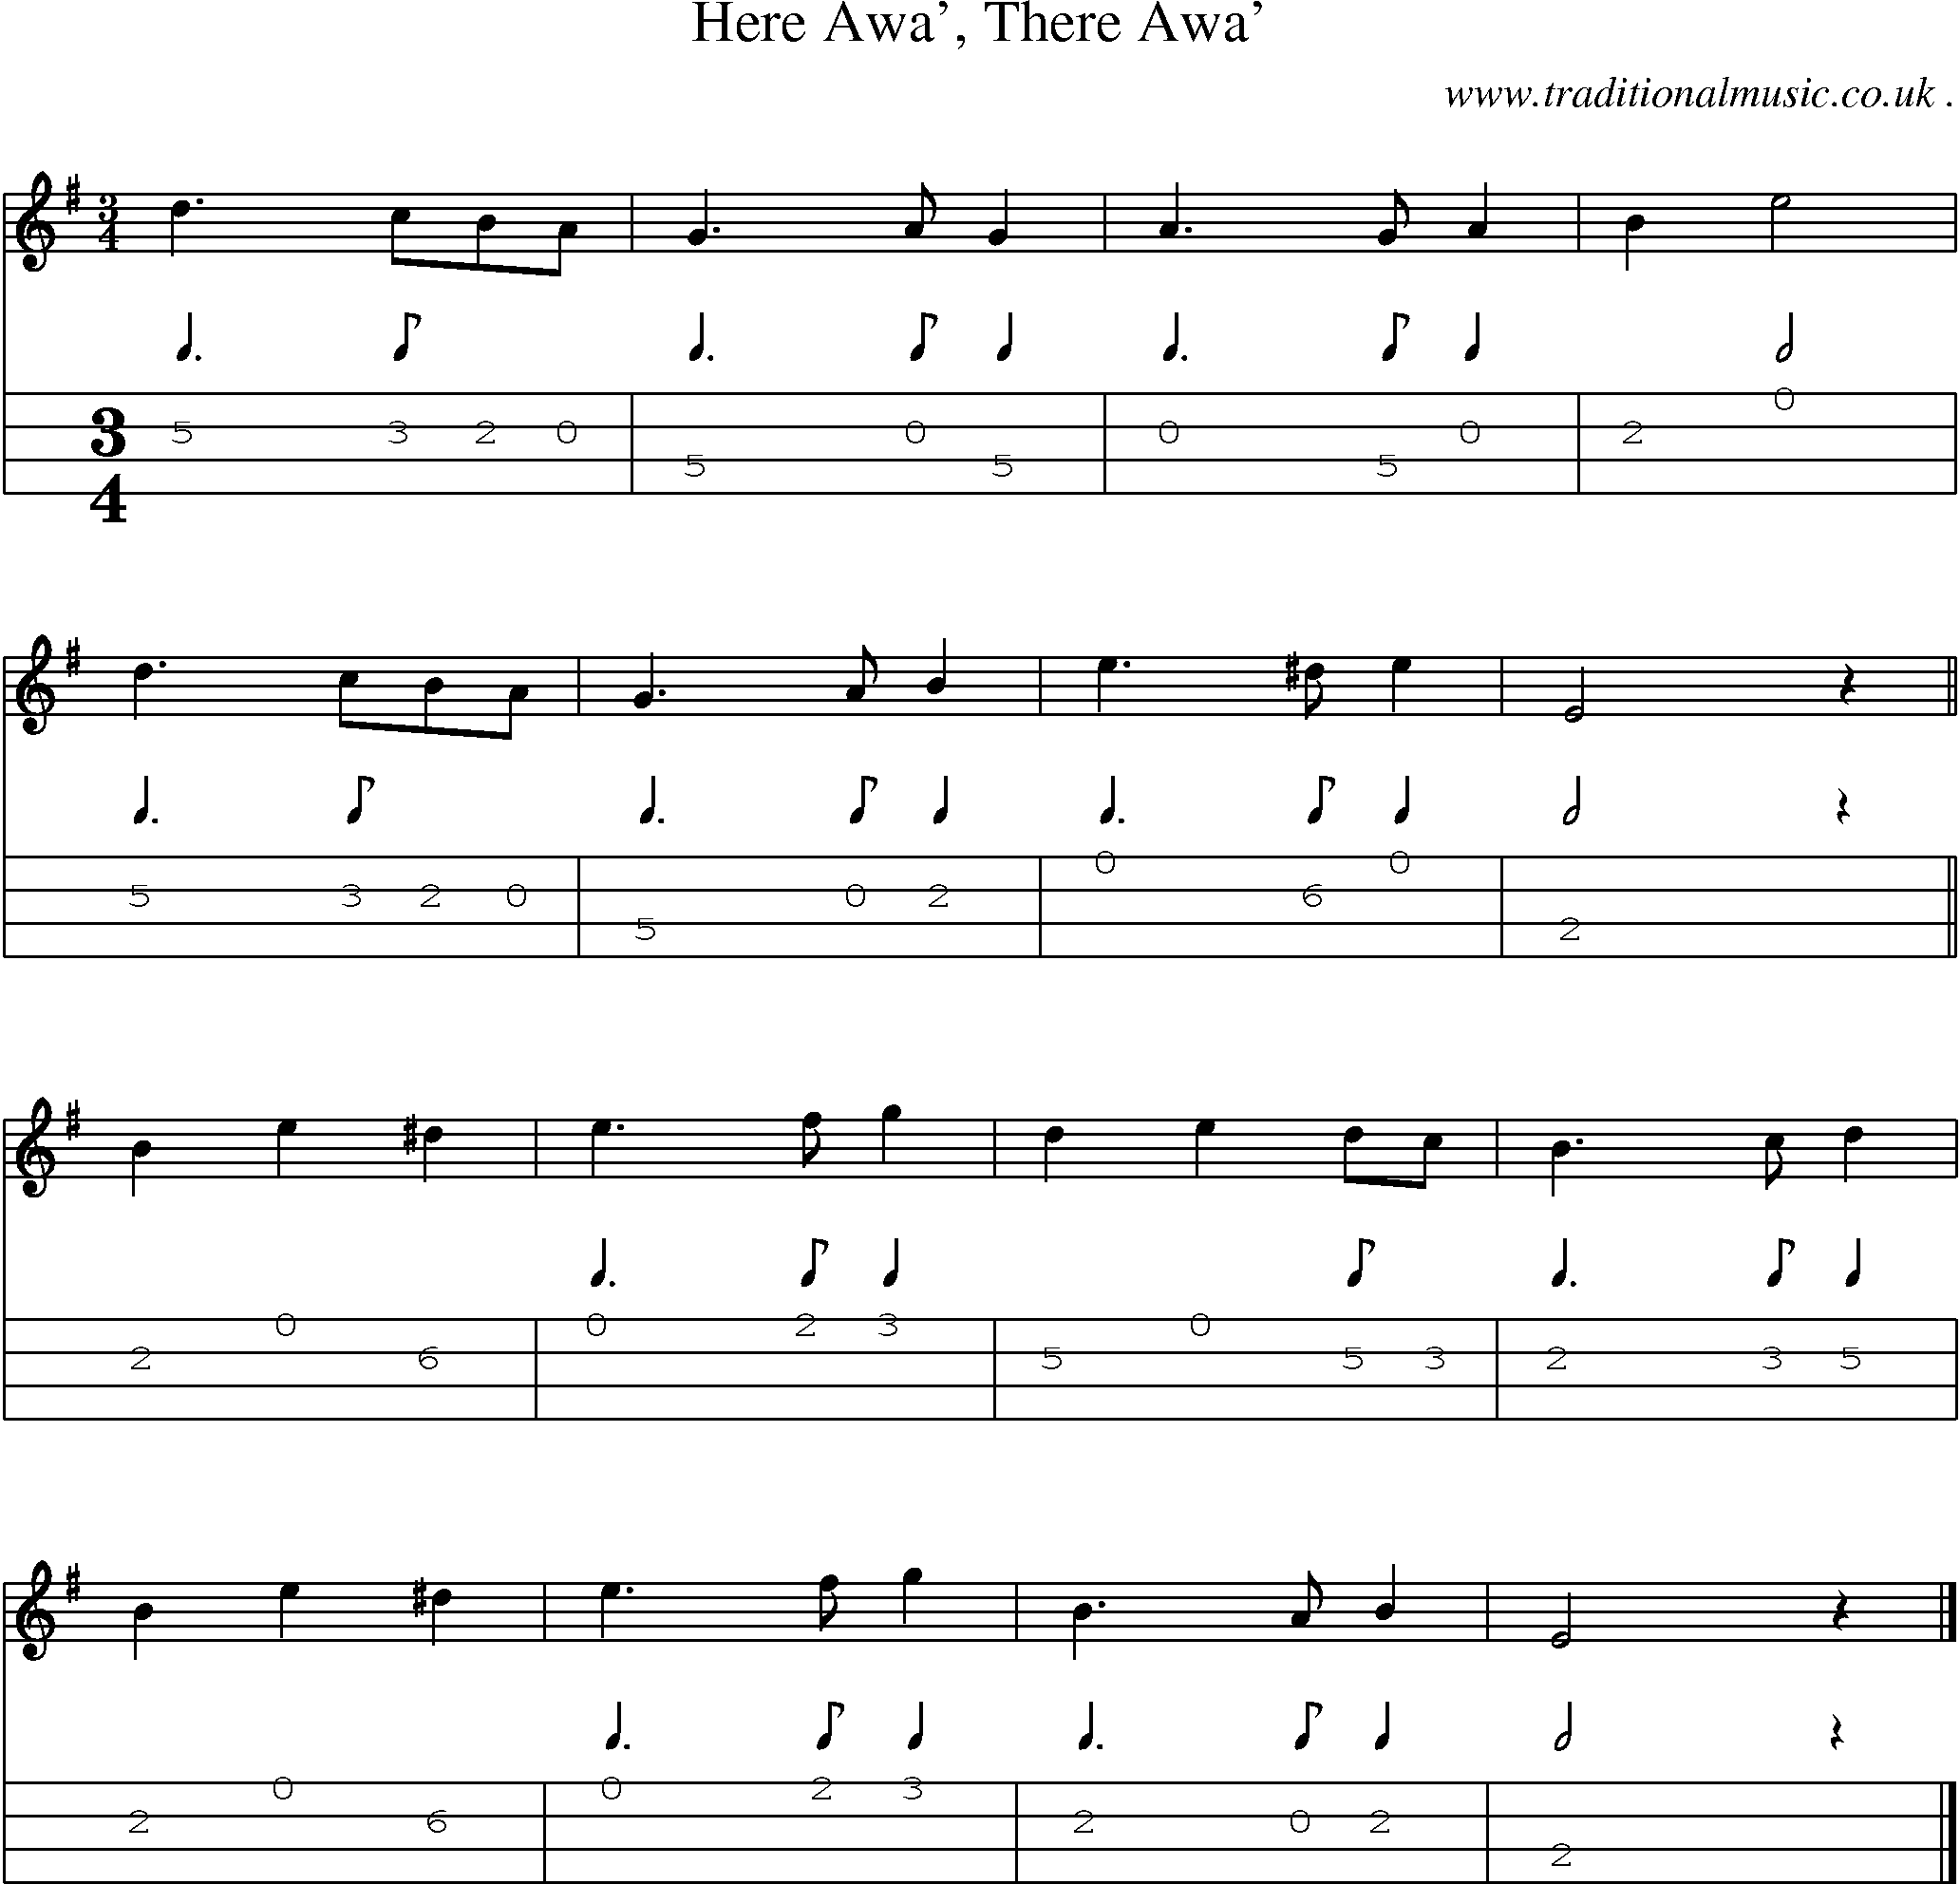 Sheet-music  score, Chords and Mandolin Tabs for Here Awa There Awa